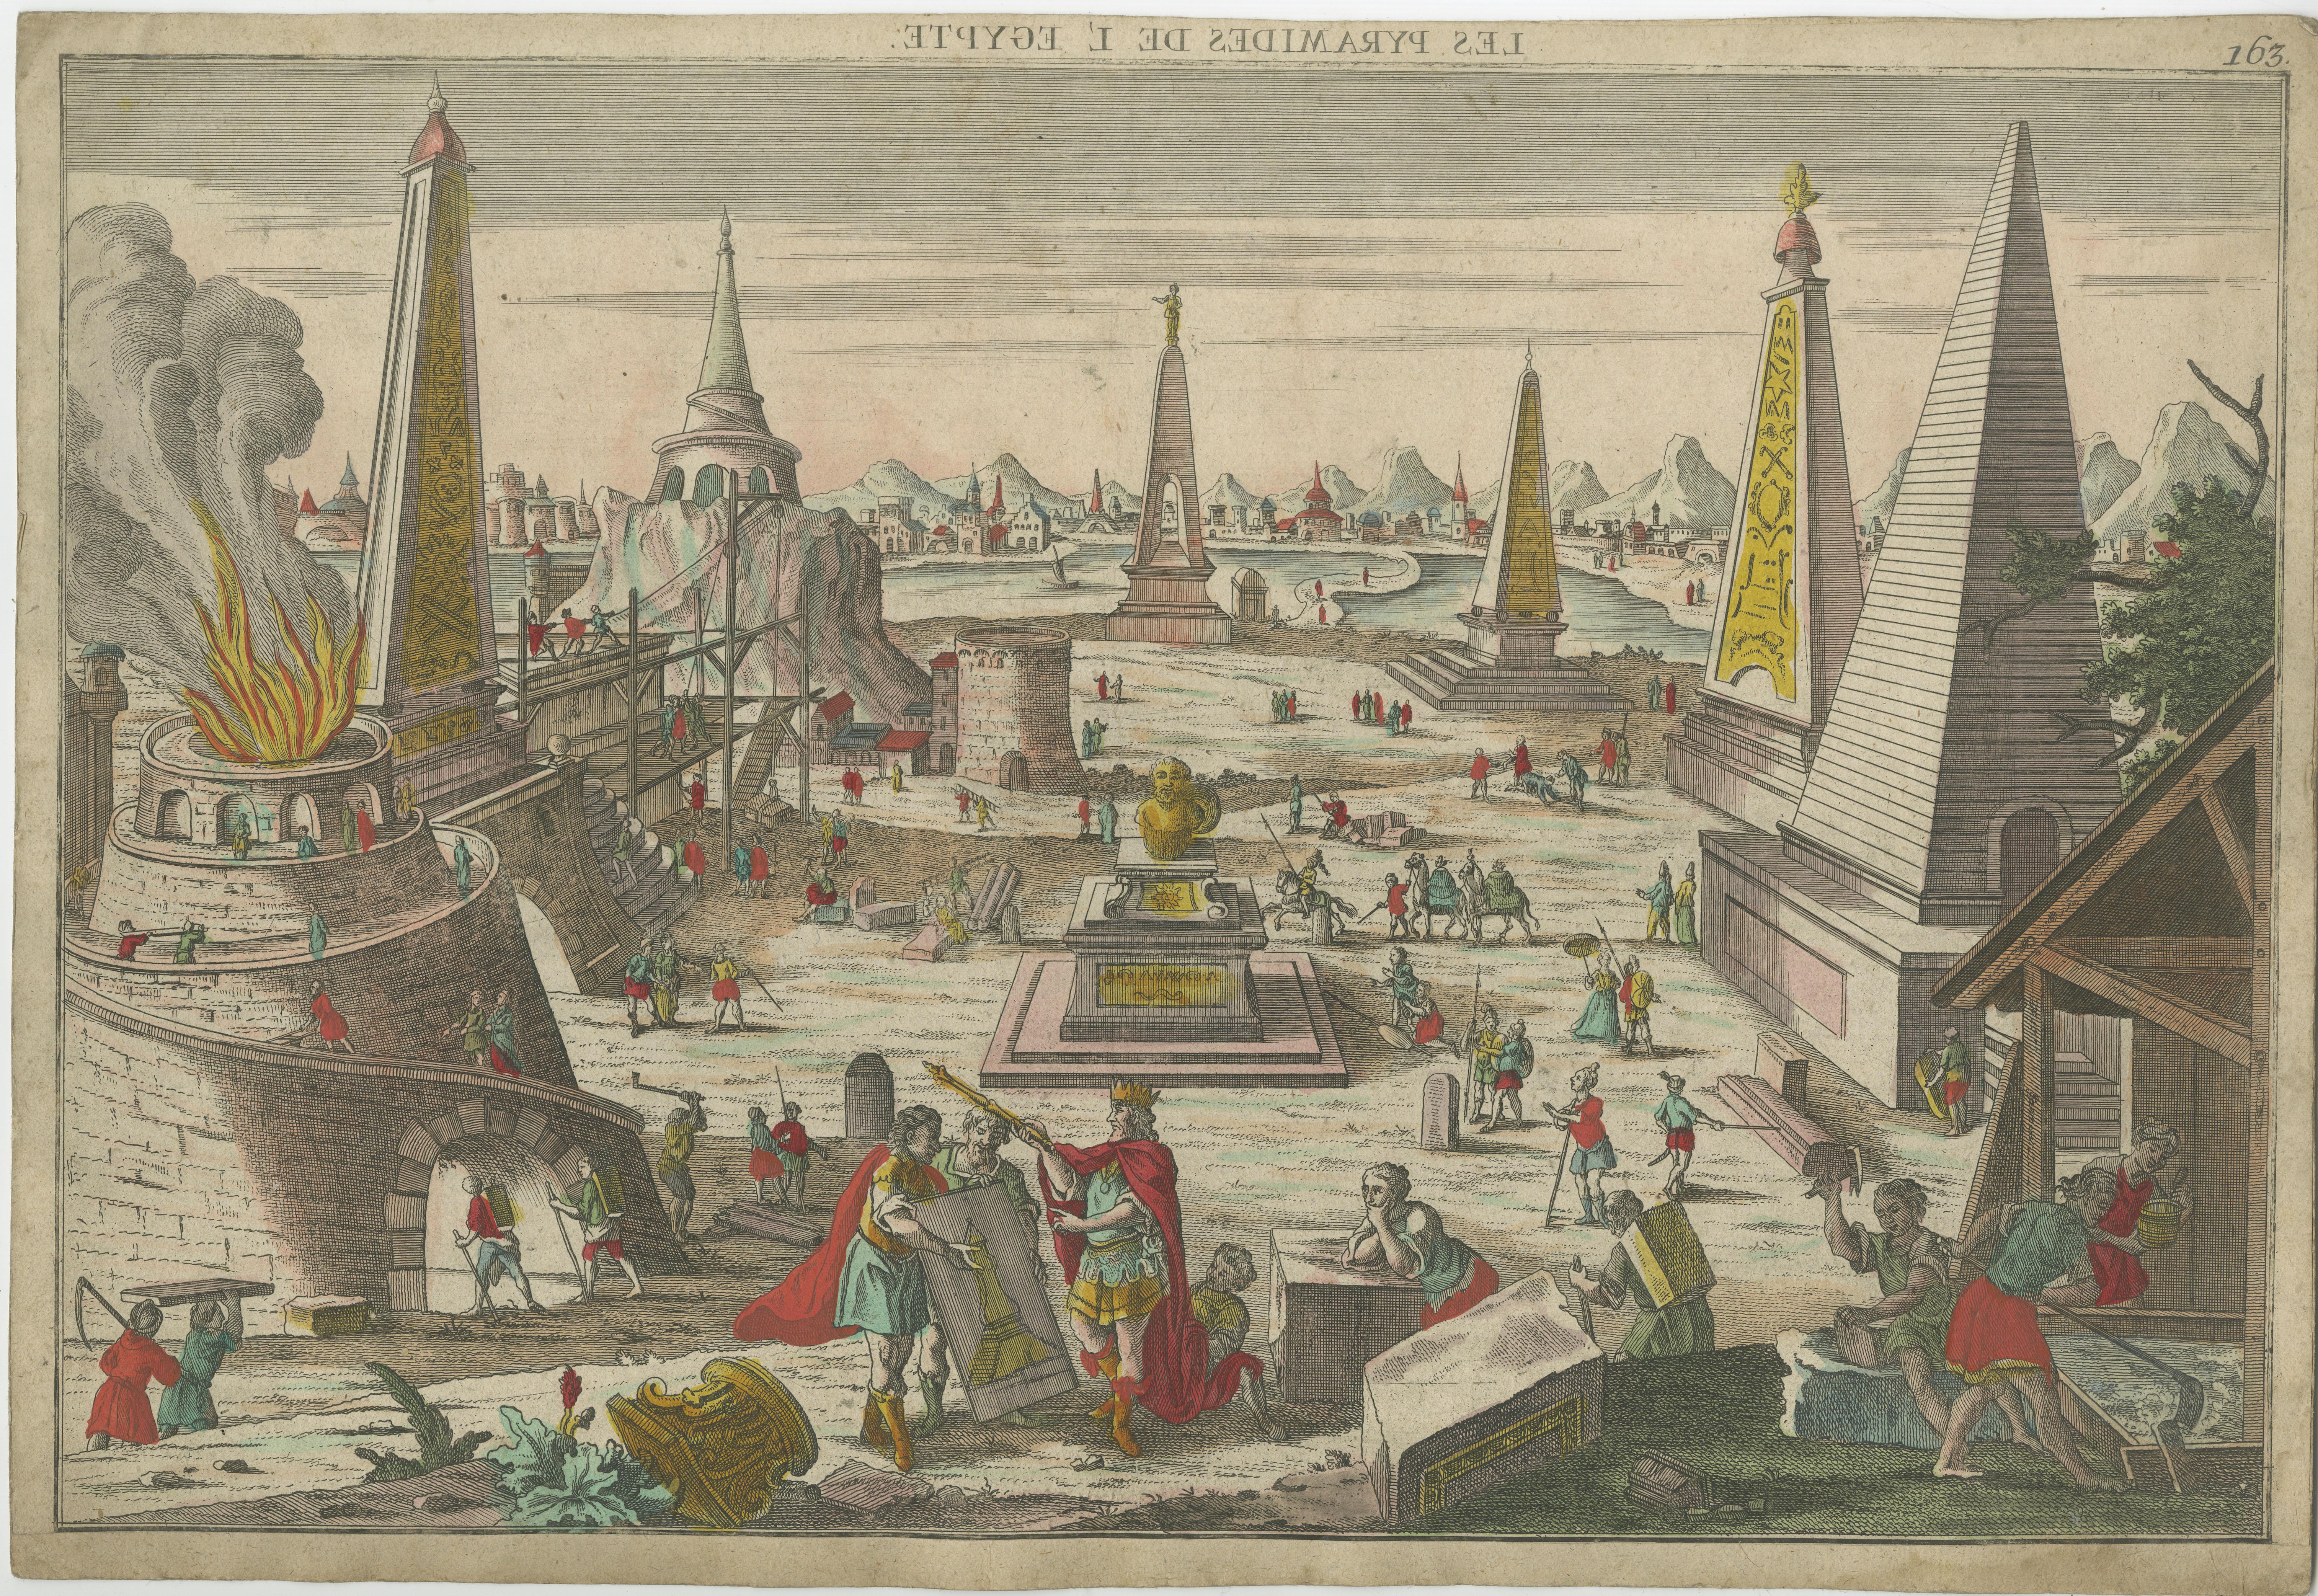 Antique print titled 'Les Pyramides de l'Egypte'. A vue d'optique of the pyramids of Egypt, one of the Seven Wonders of the World.

This is an optical print, also called 'vue optique' or 'vue d'optique', which were made to be viewed through a